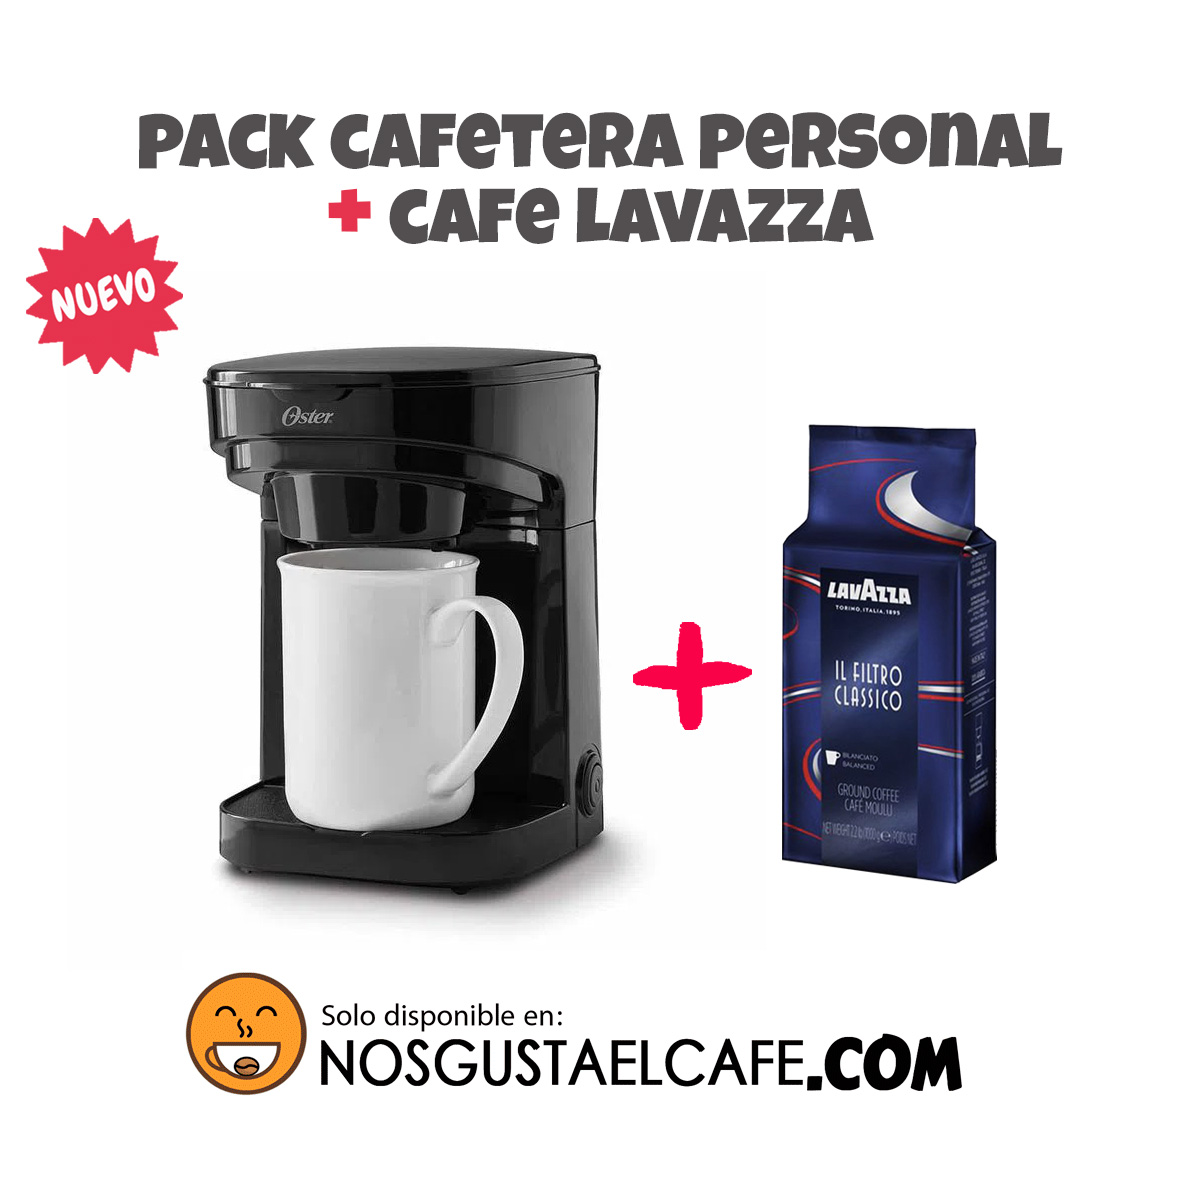 https://nosgustaelcafe.com/wp-content/uploads/2021/11/Cafetera-personal-Oster-lavazza.jpg